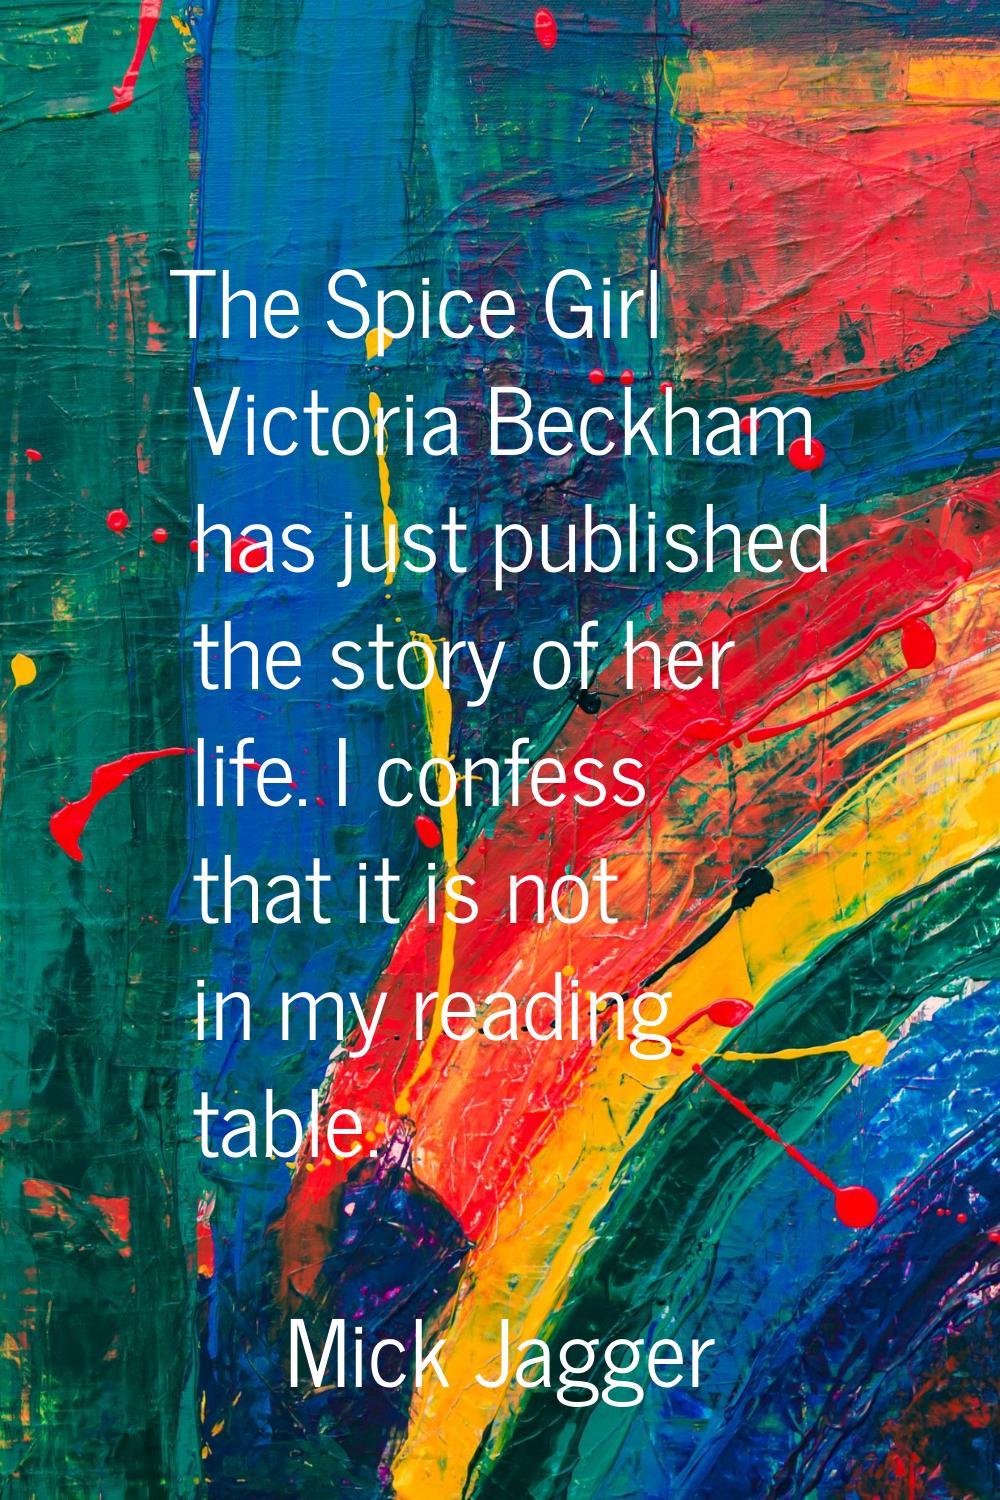 The Spice Girl Victoria Beckham has just published the story of her life. I confess that it is not 